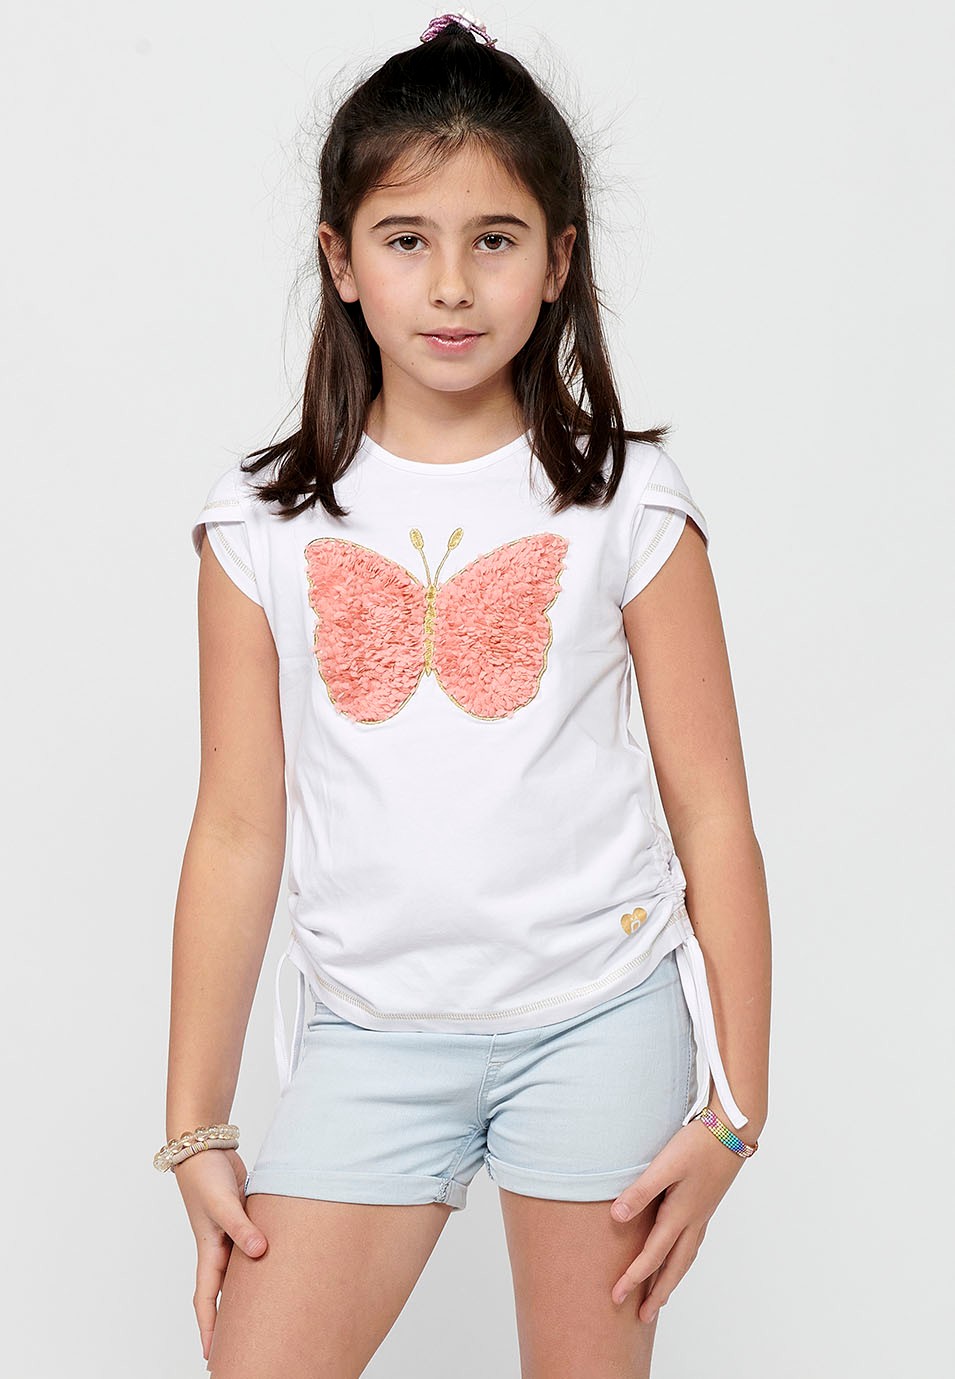 Short-sleeved T-shirt Round Neck Top with Front Print and White Side Details for Girls